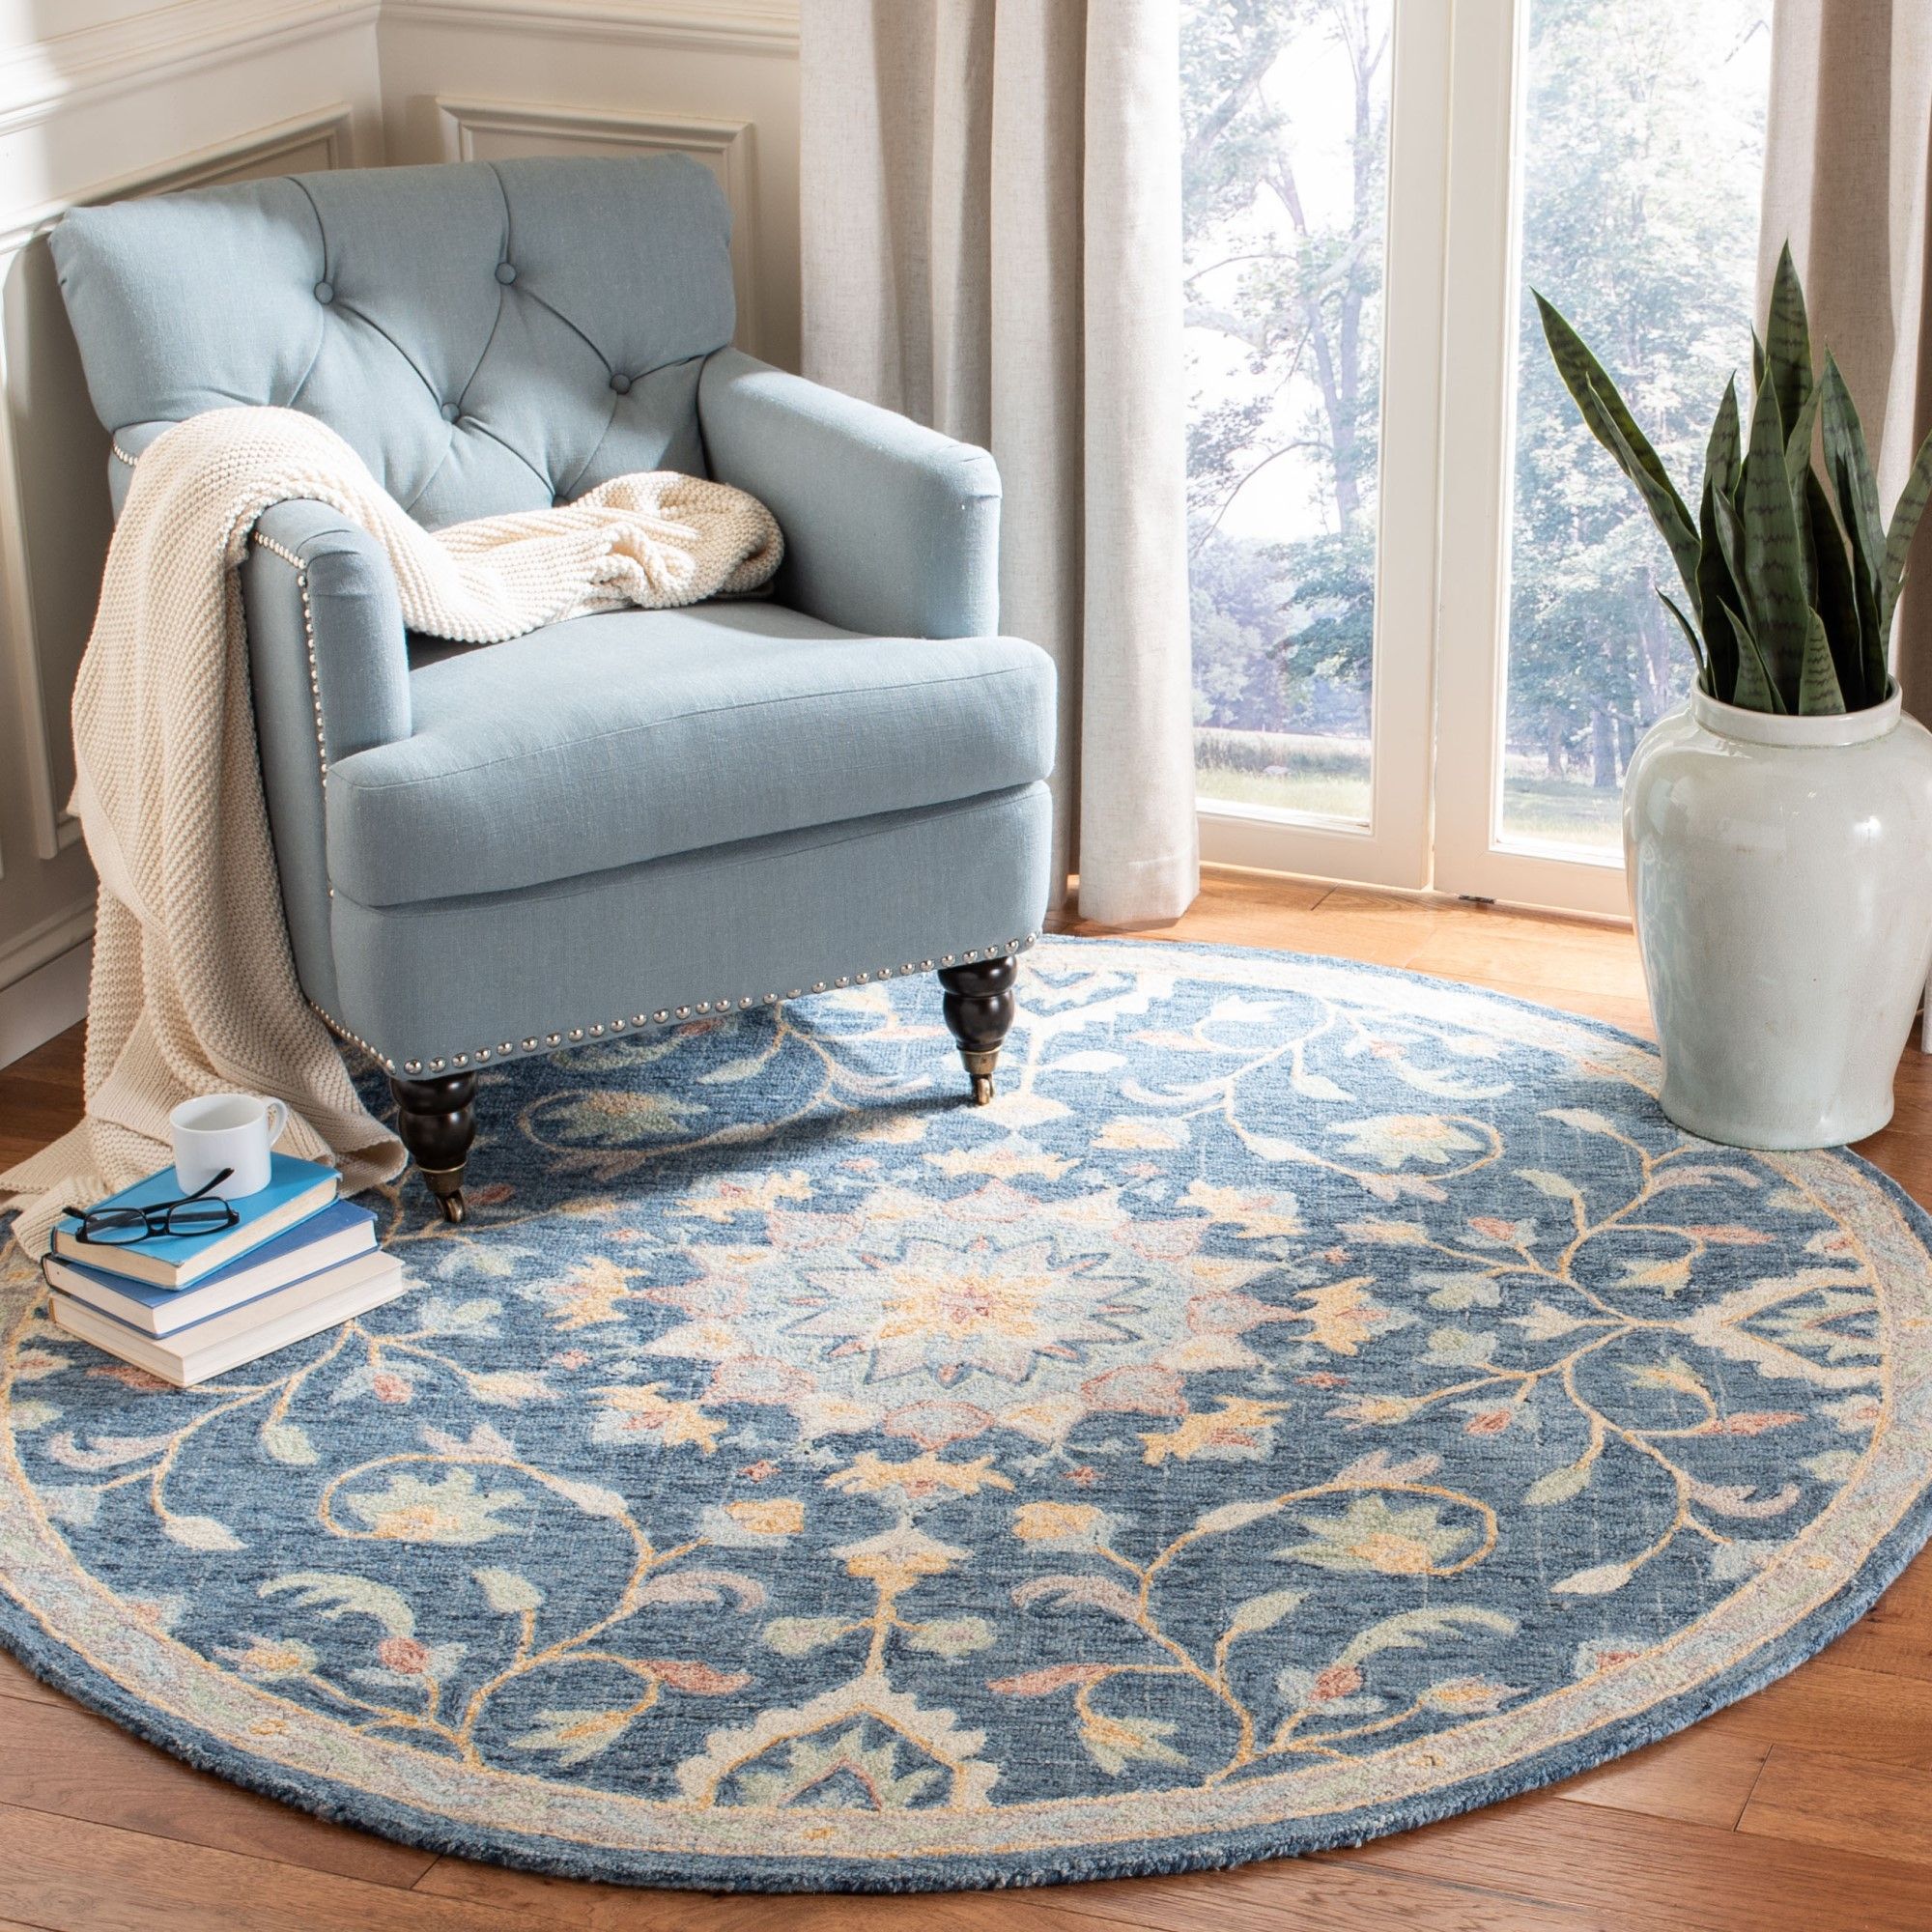 Safavieh Blossom Blm 813 Rugs | Rugs Direct Pertaining To Ivory Blossom Round Rugs (View 15 of 15)